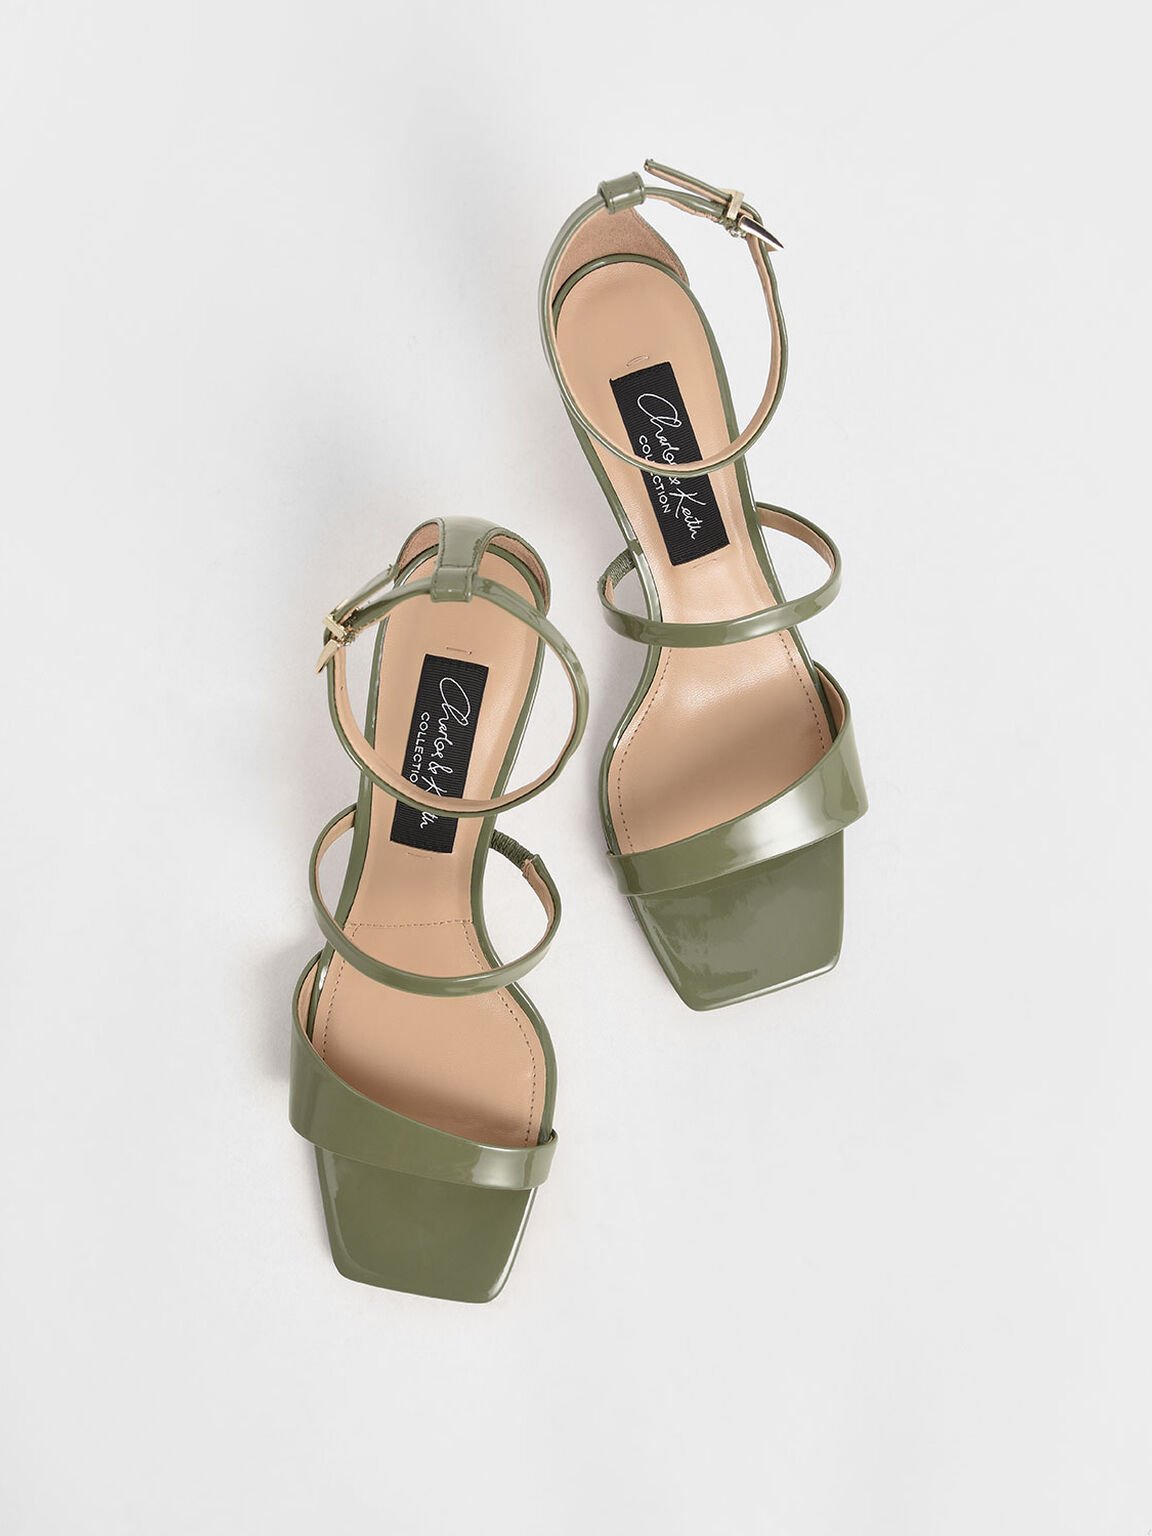 Patent Leather Strappy Heeled Sandals, Green, hi-res